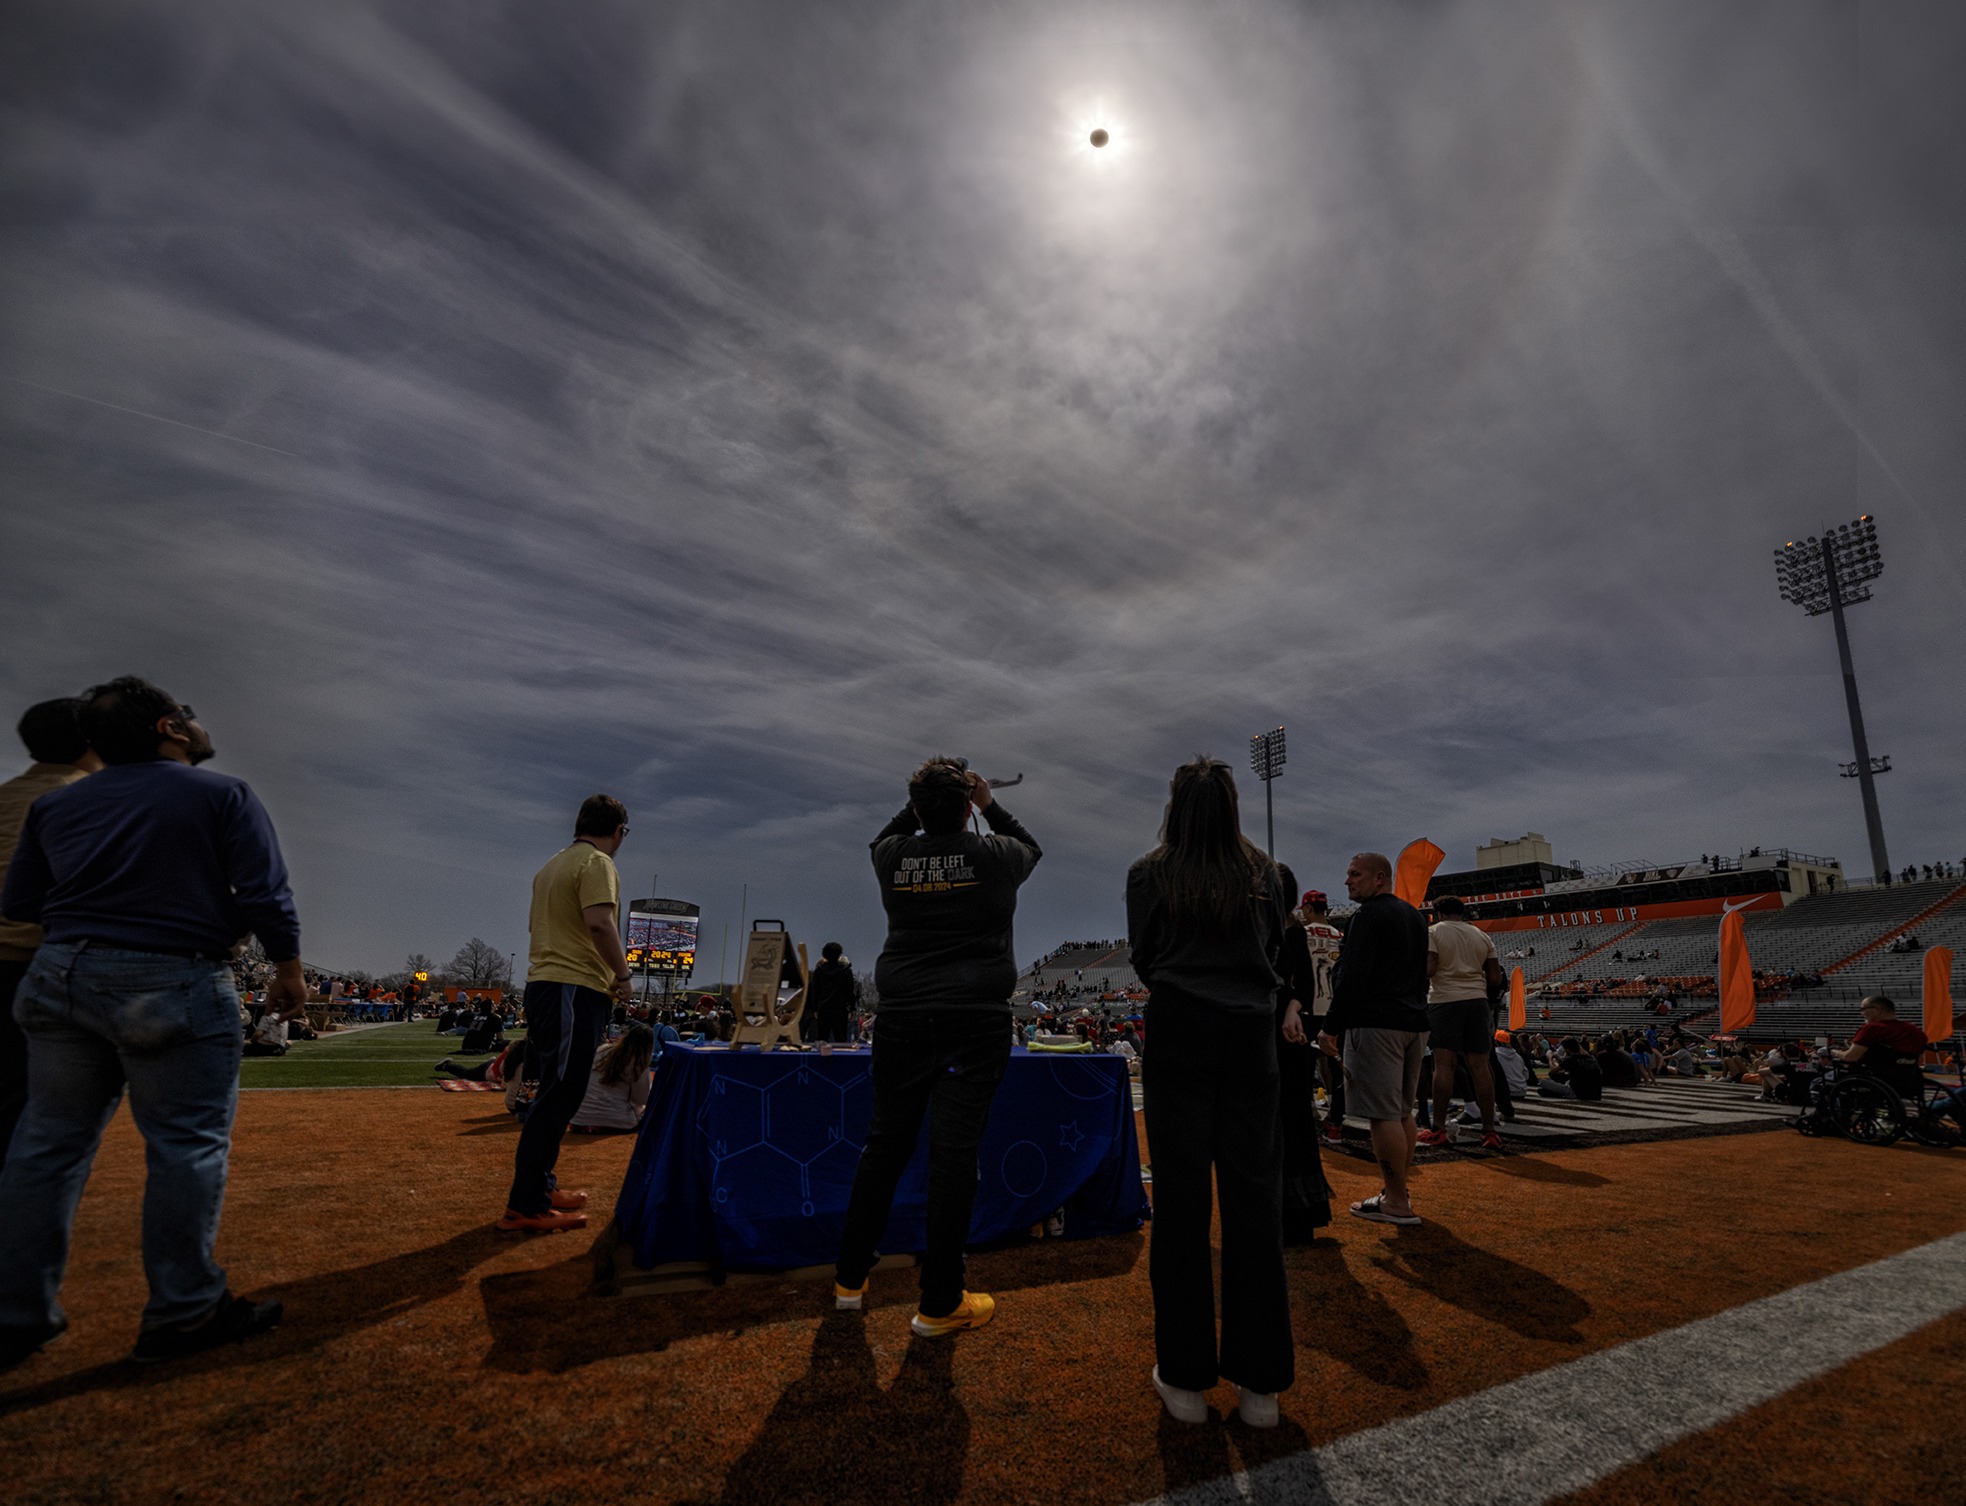  People watch the total solar eclipse in a football stadium 